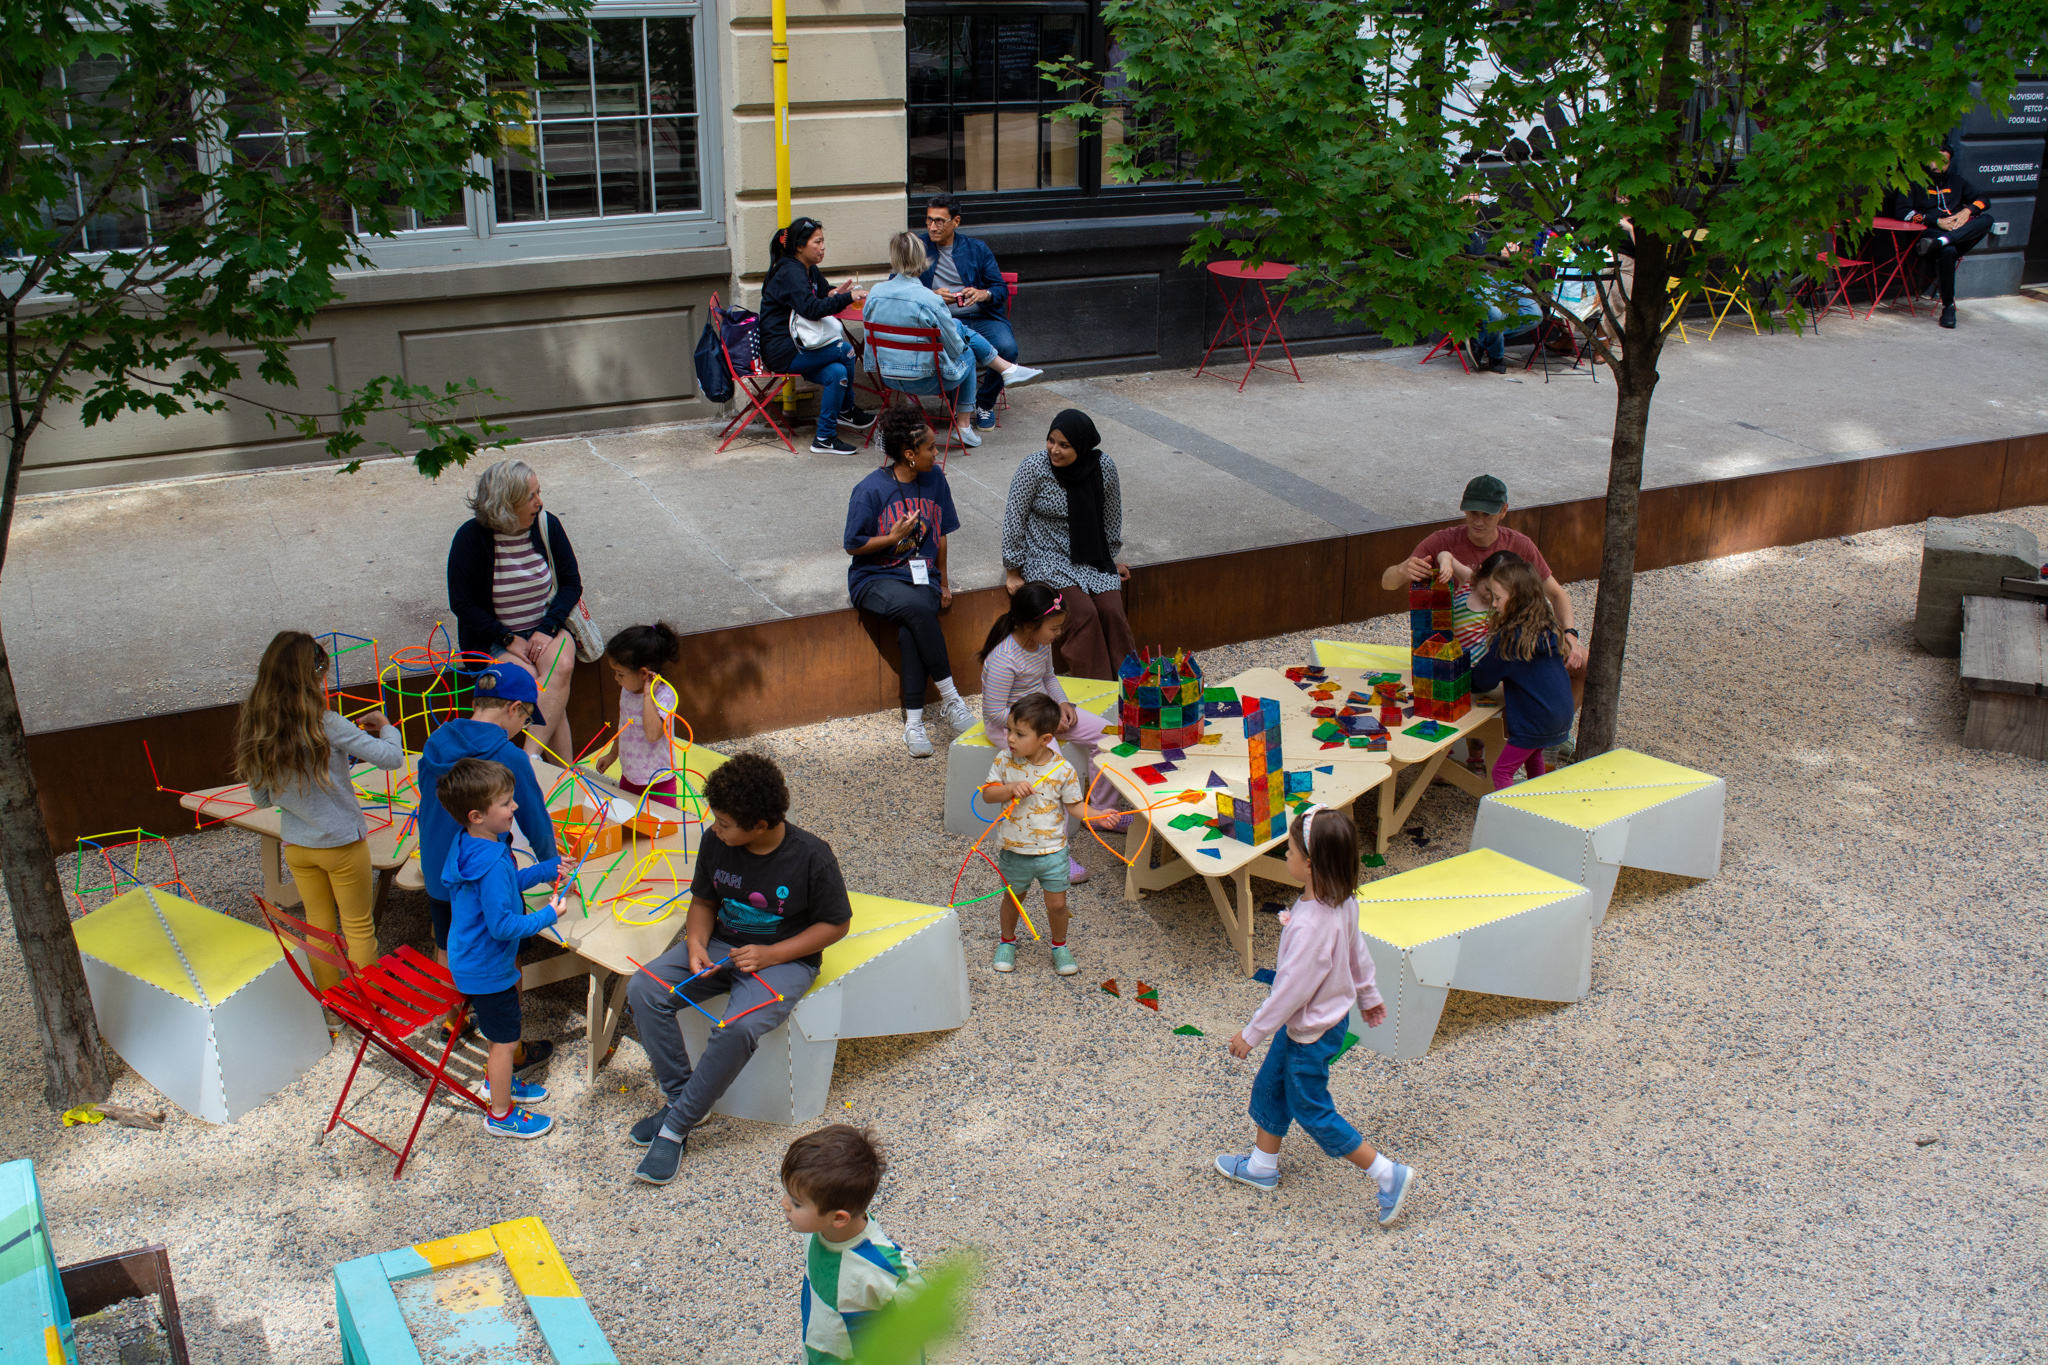 A view of children playing in an outdoor area of a food hall. 